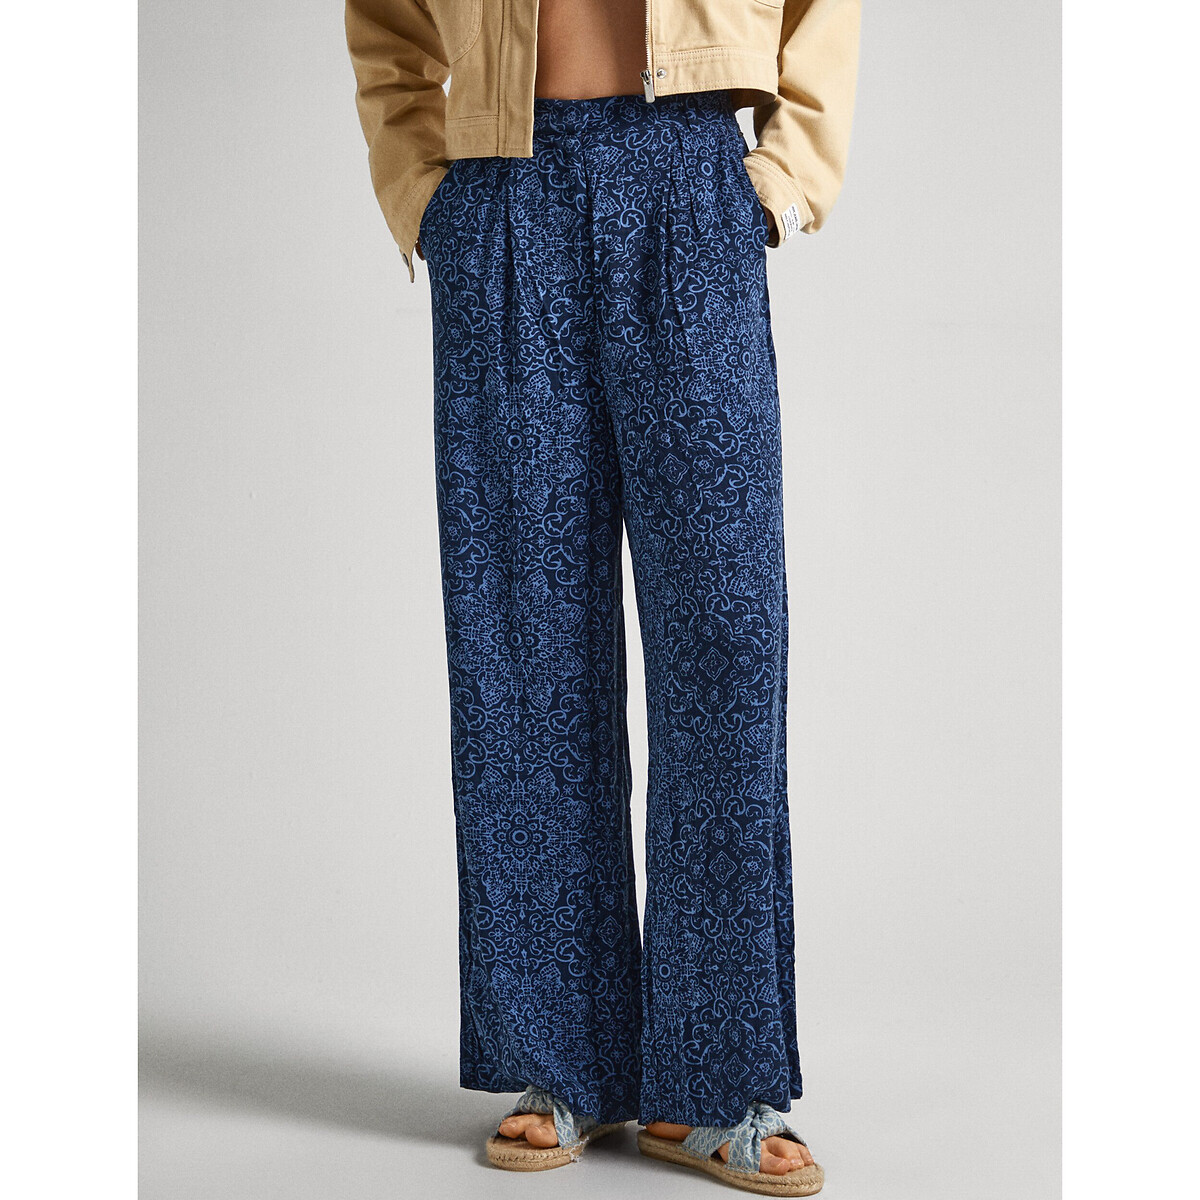 Floral Print Palazzo Trousers